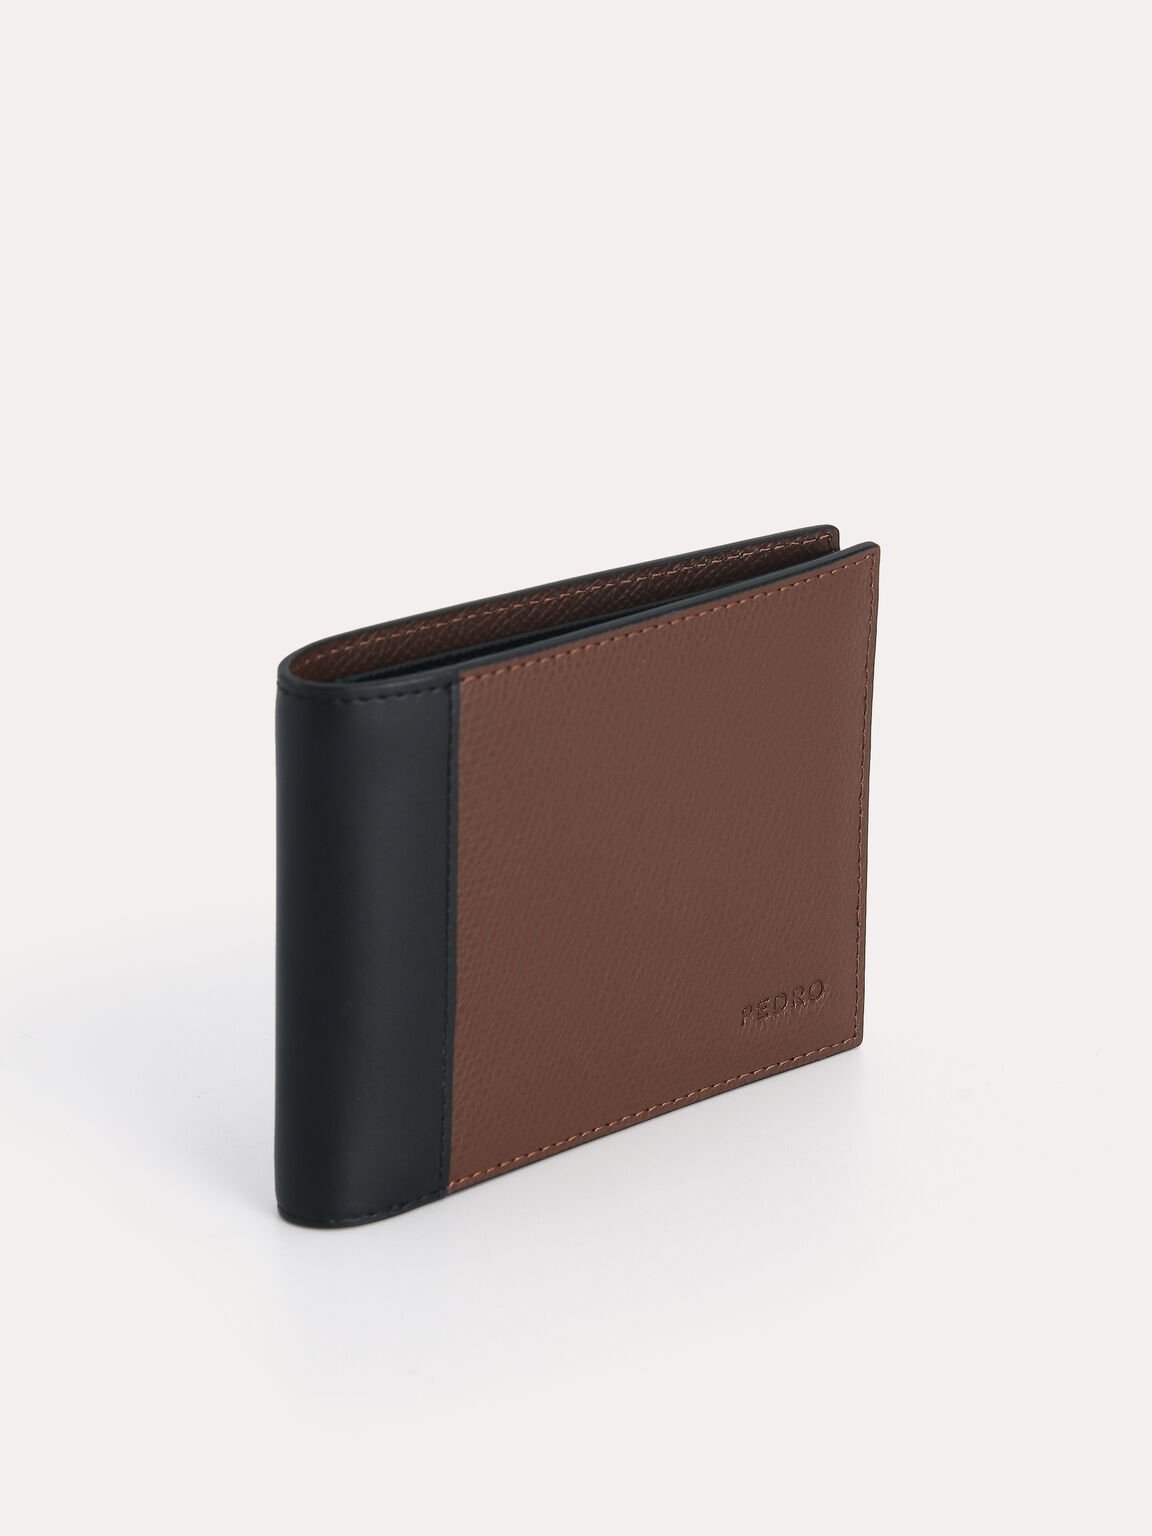 Textured Leather Bi-Fold Wallet with Flip, Brown